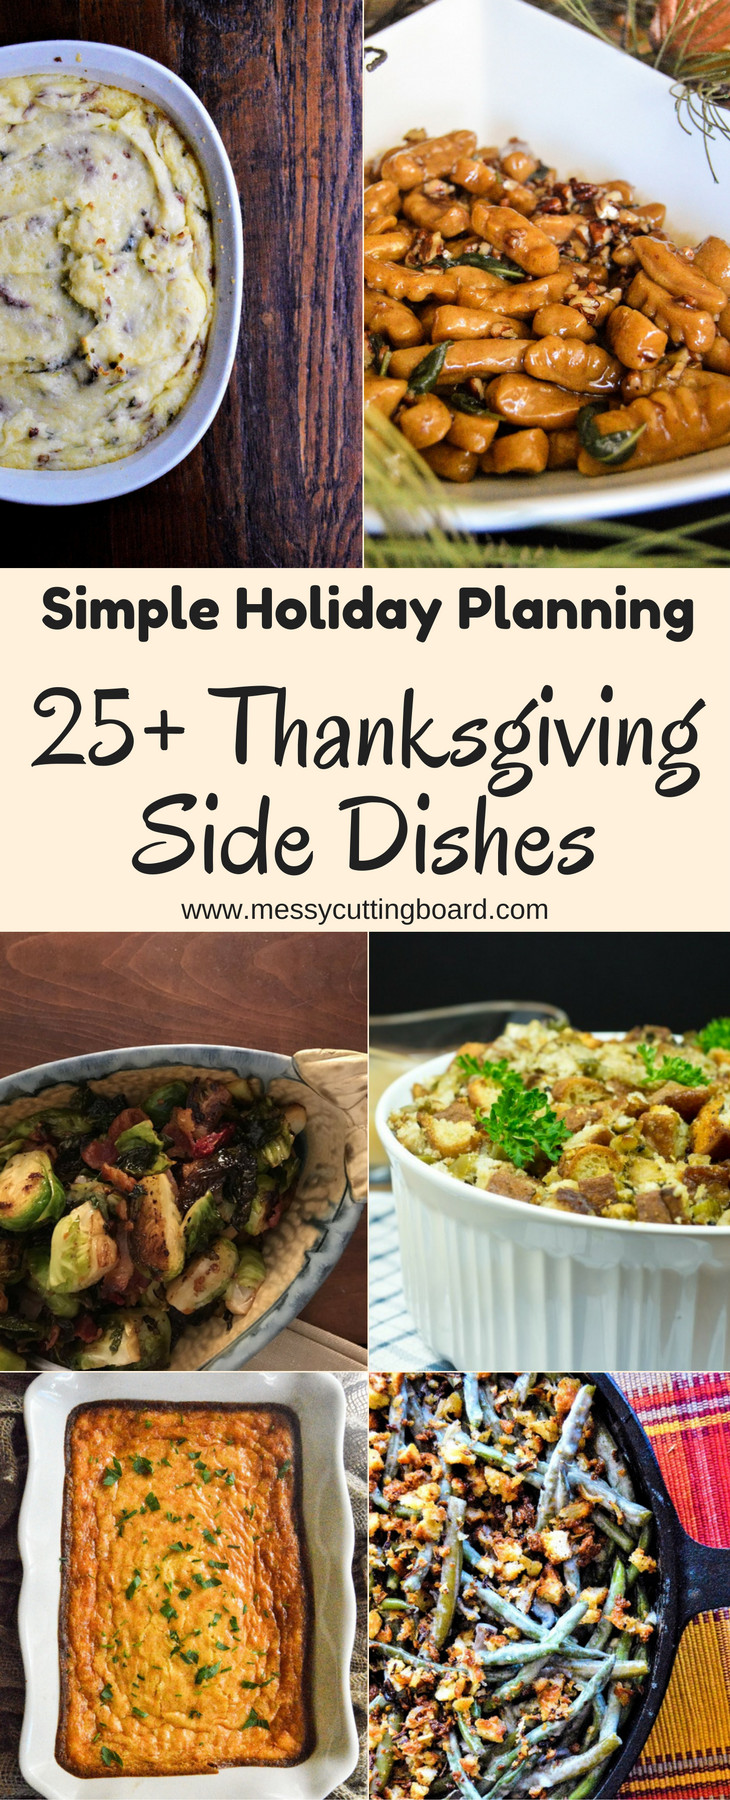 Thanksgiving Side Dishes List
 The Ultimate List of Thanksgiving Side Dishes Messy